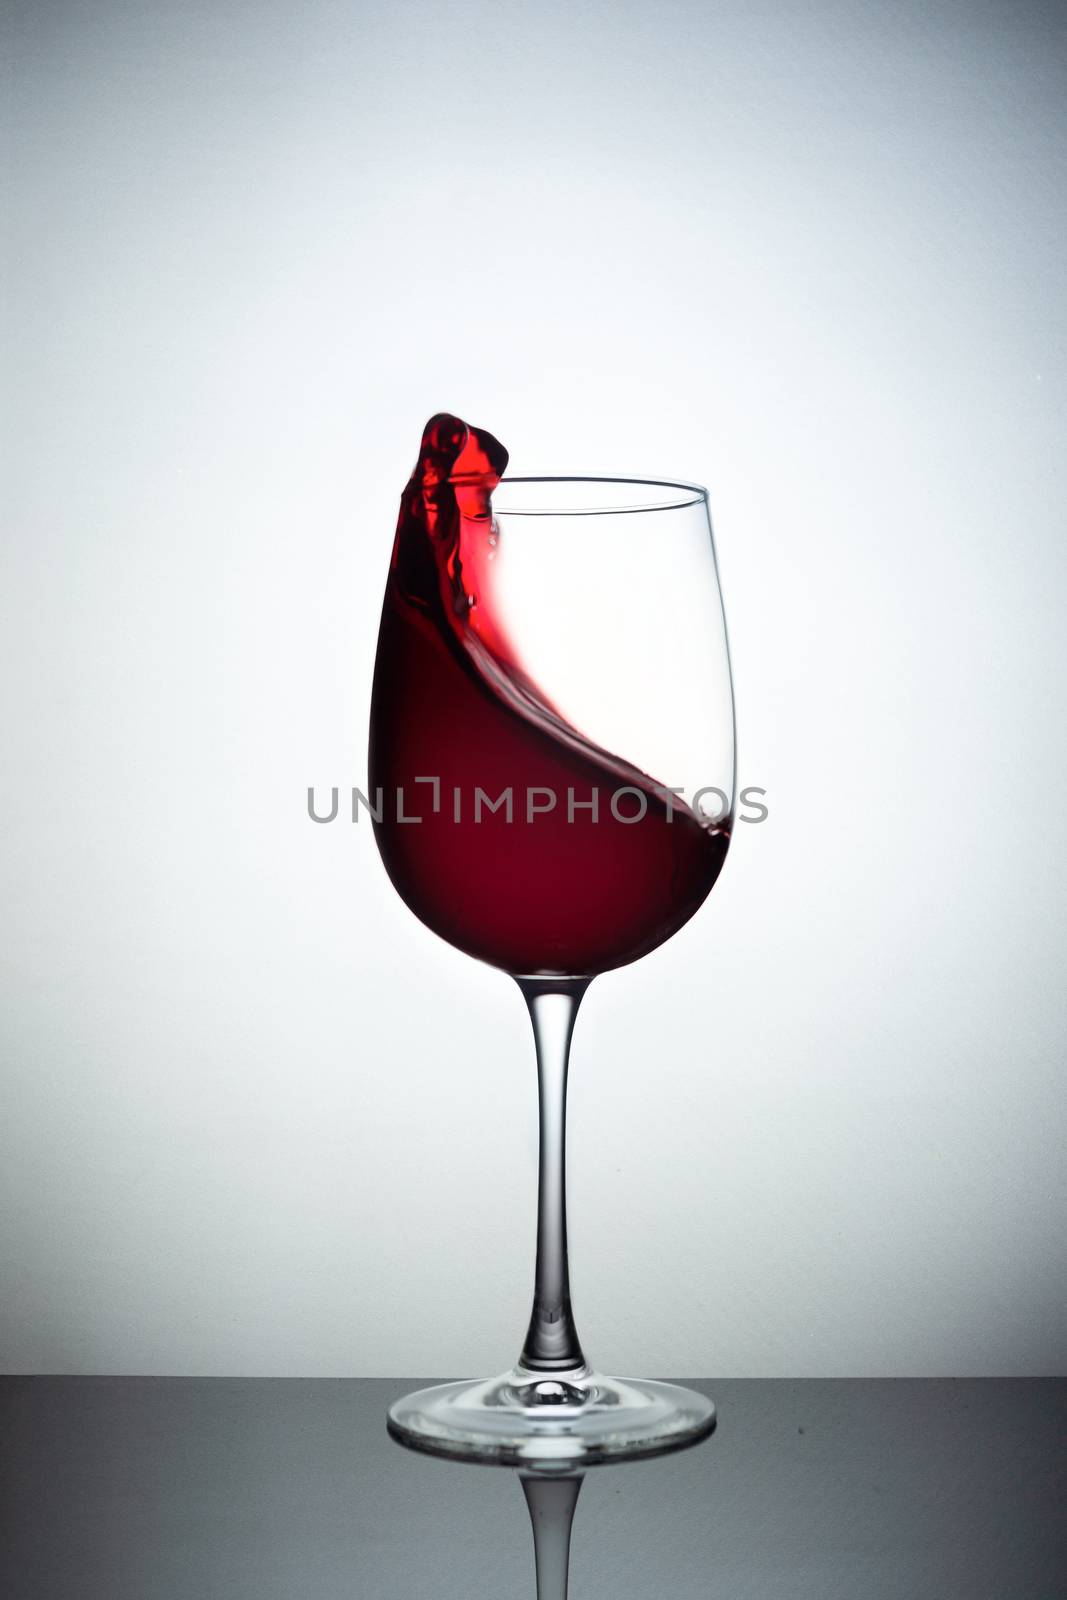 Creative photo of wine glass with storm in a glass on white back by alexsdriver